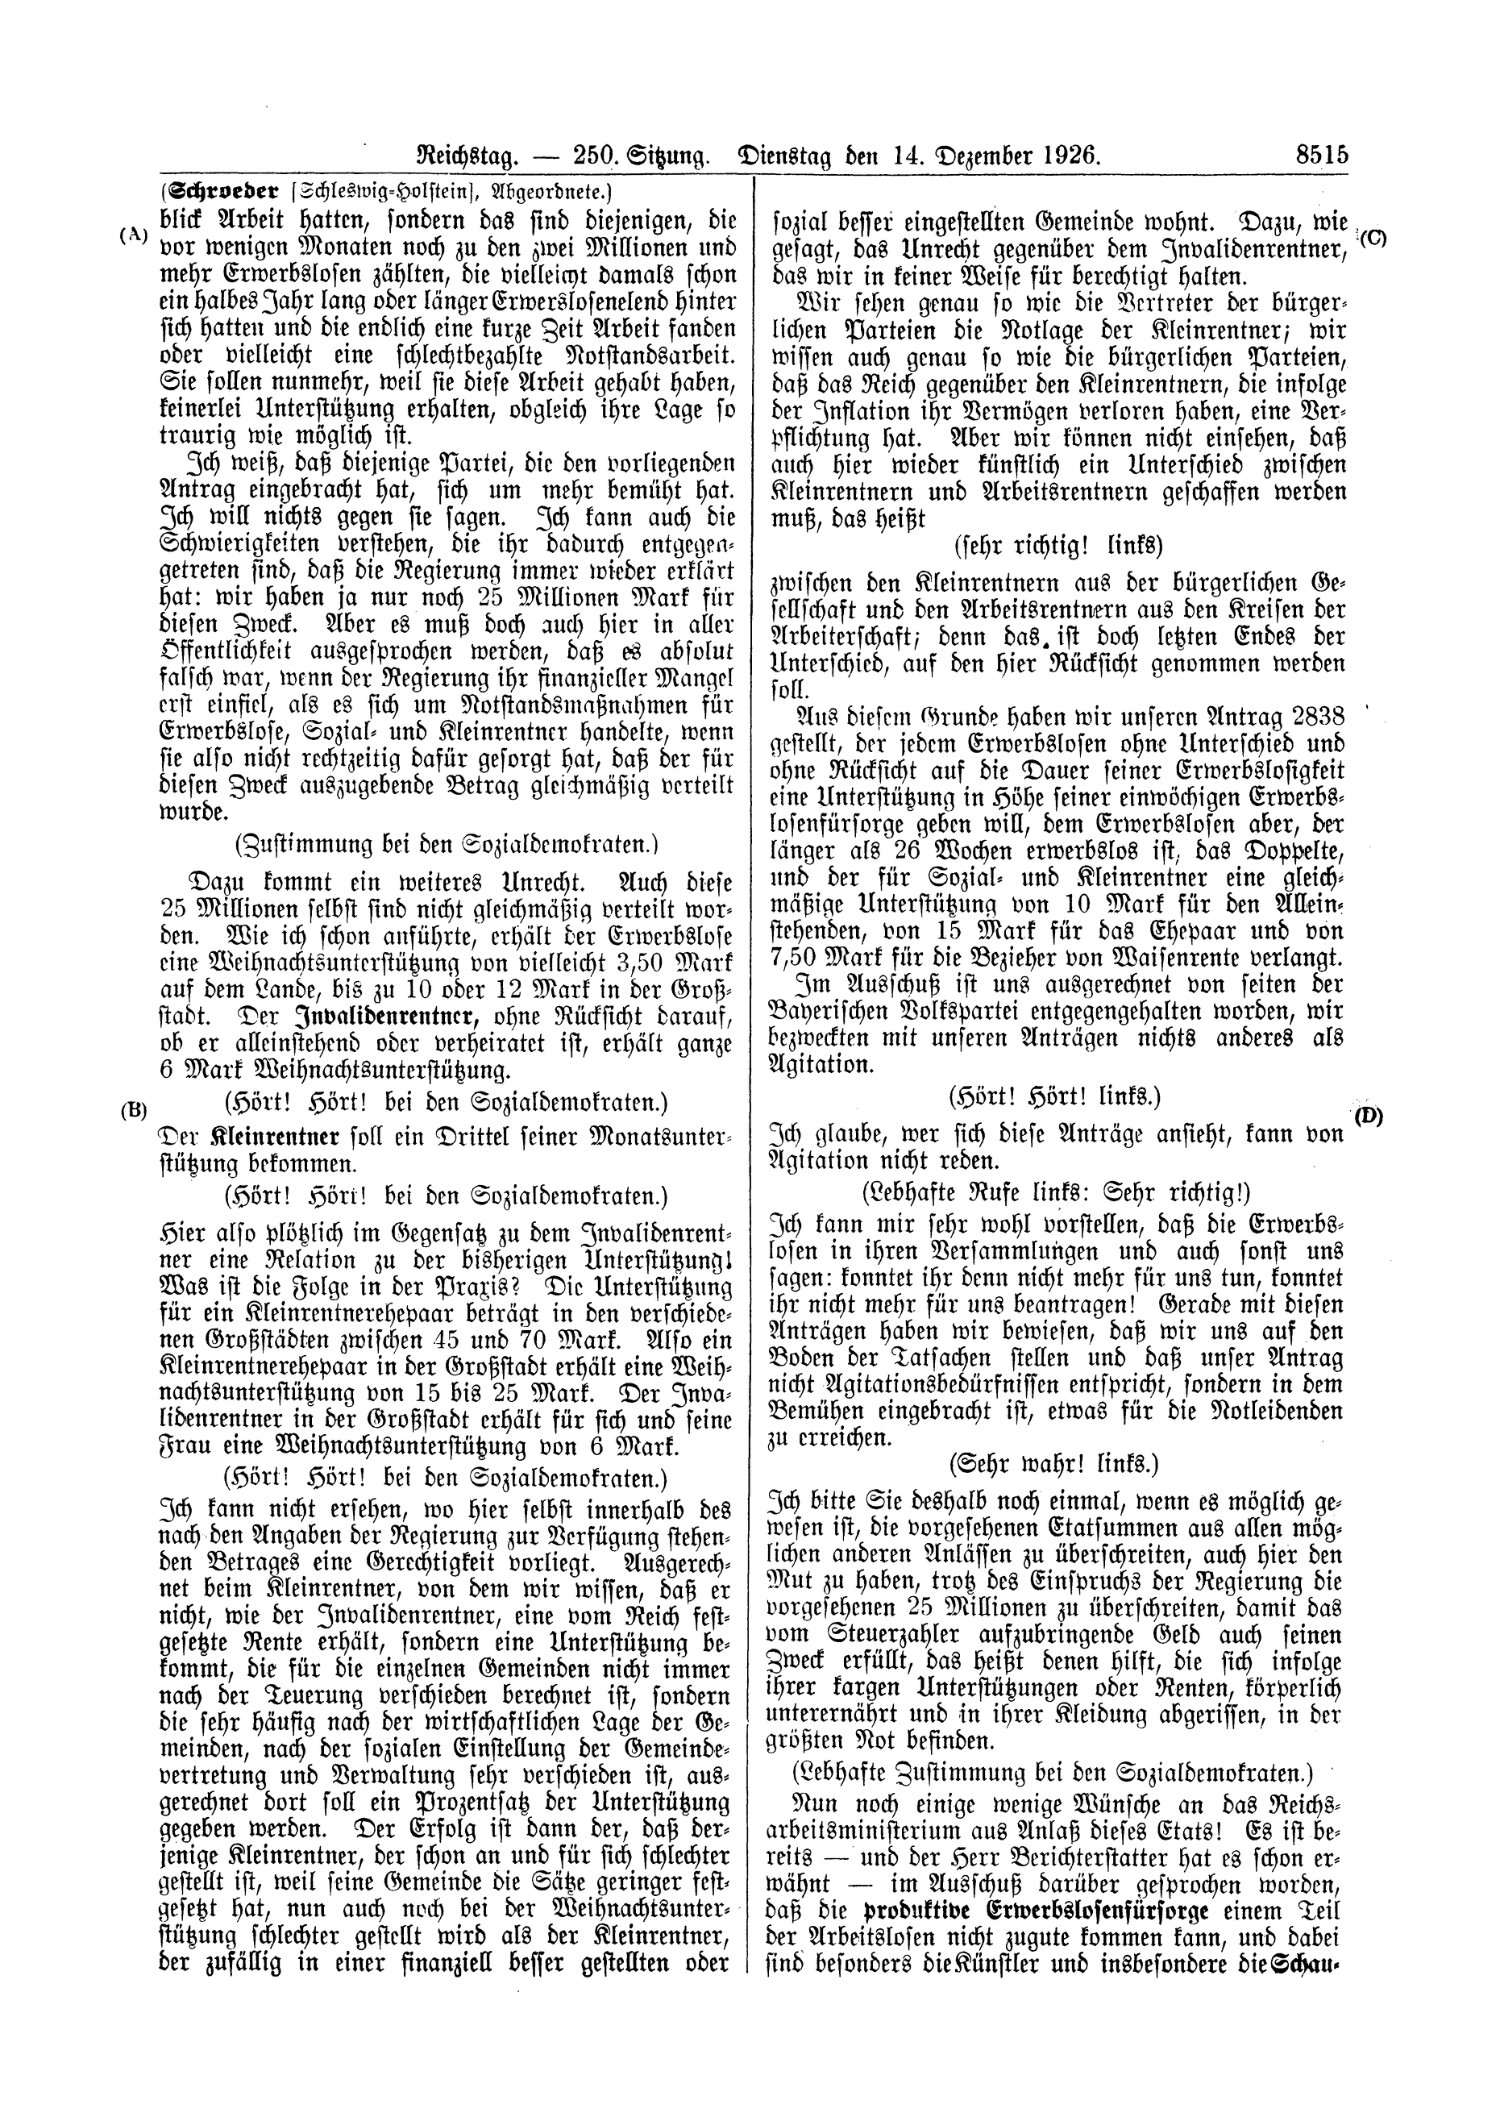 Scan of page 8515